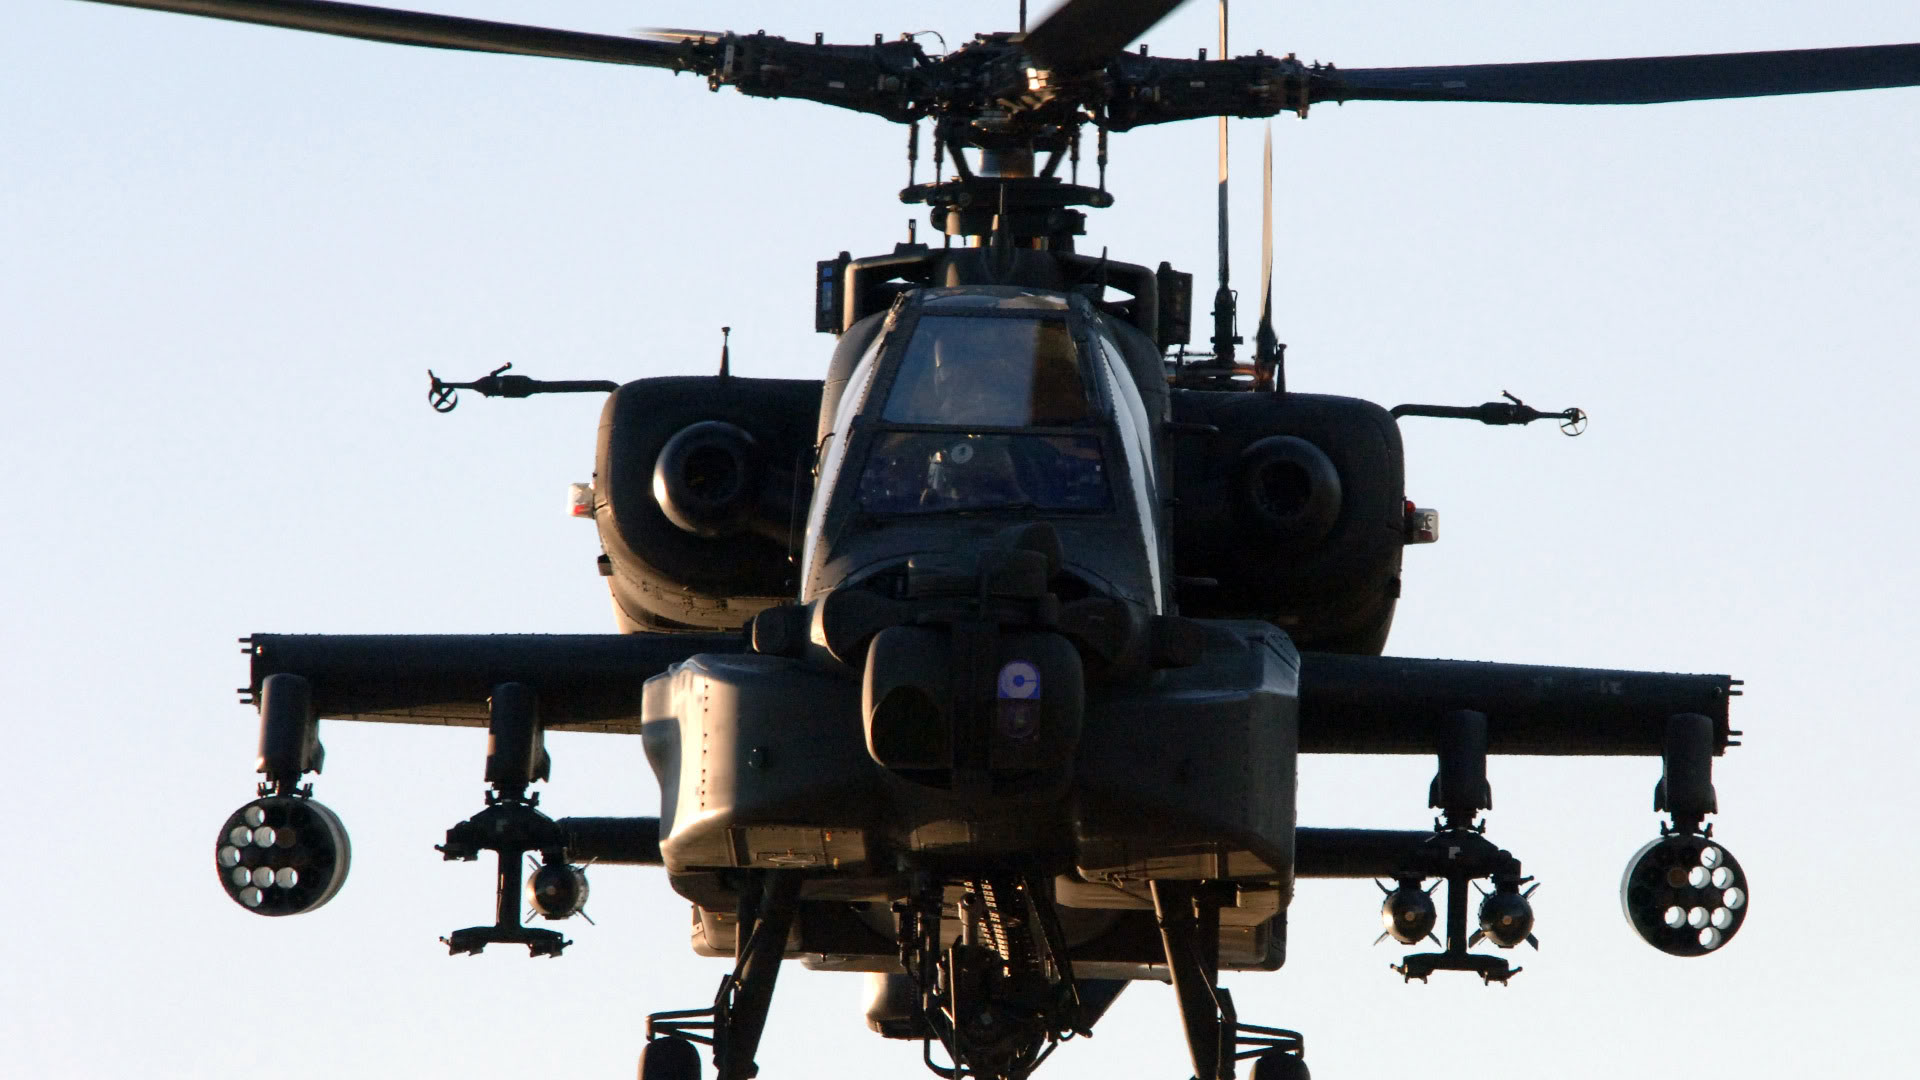 A powerful Boeing AH-64 Apache military helicopter soaring through the sky.